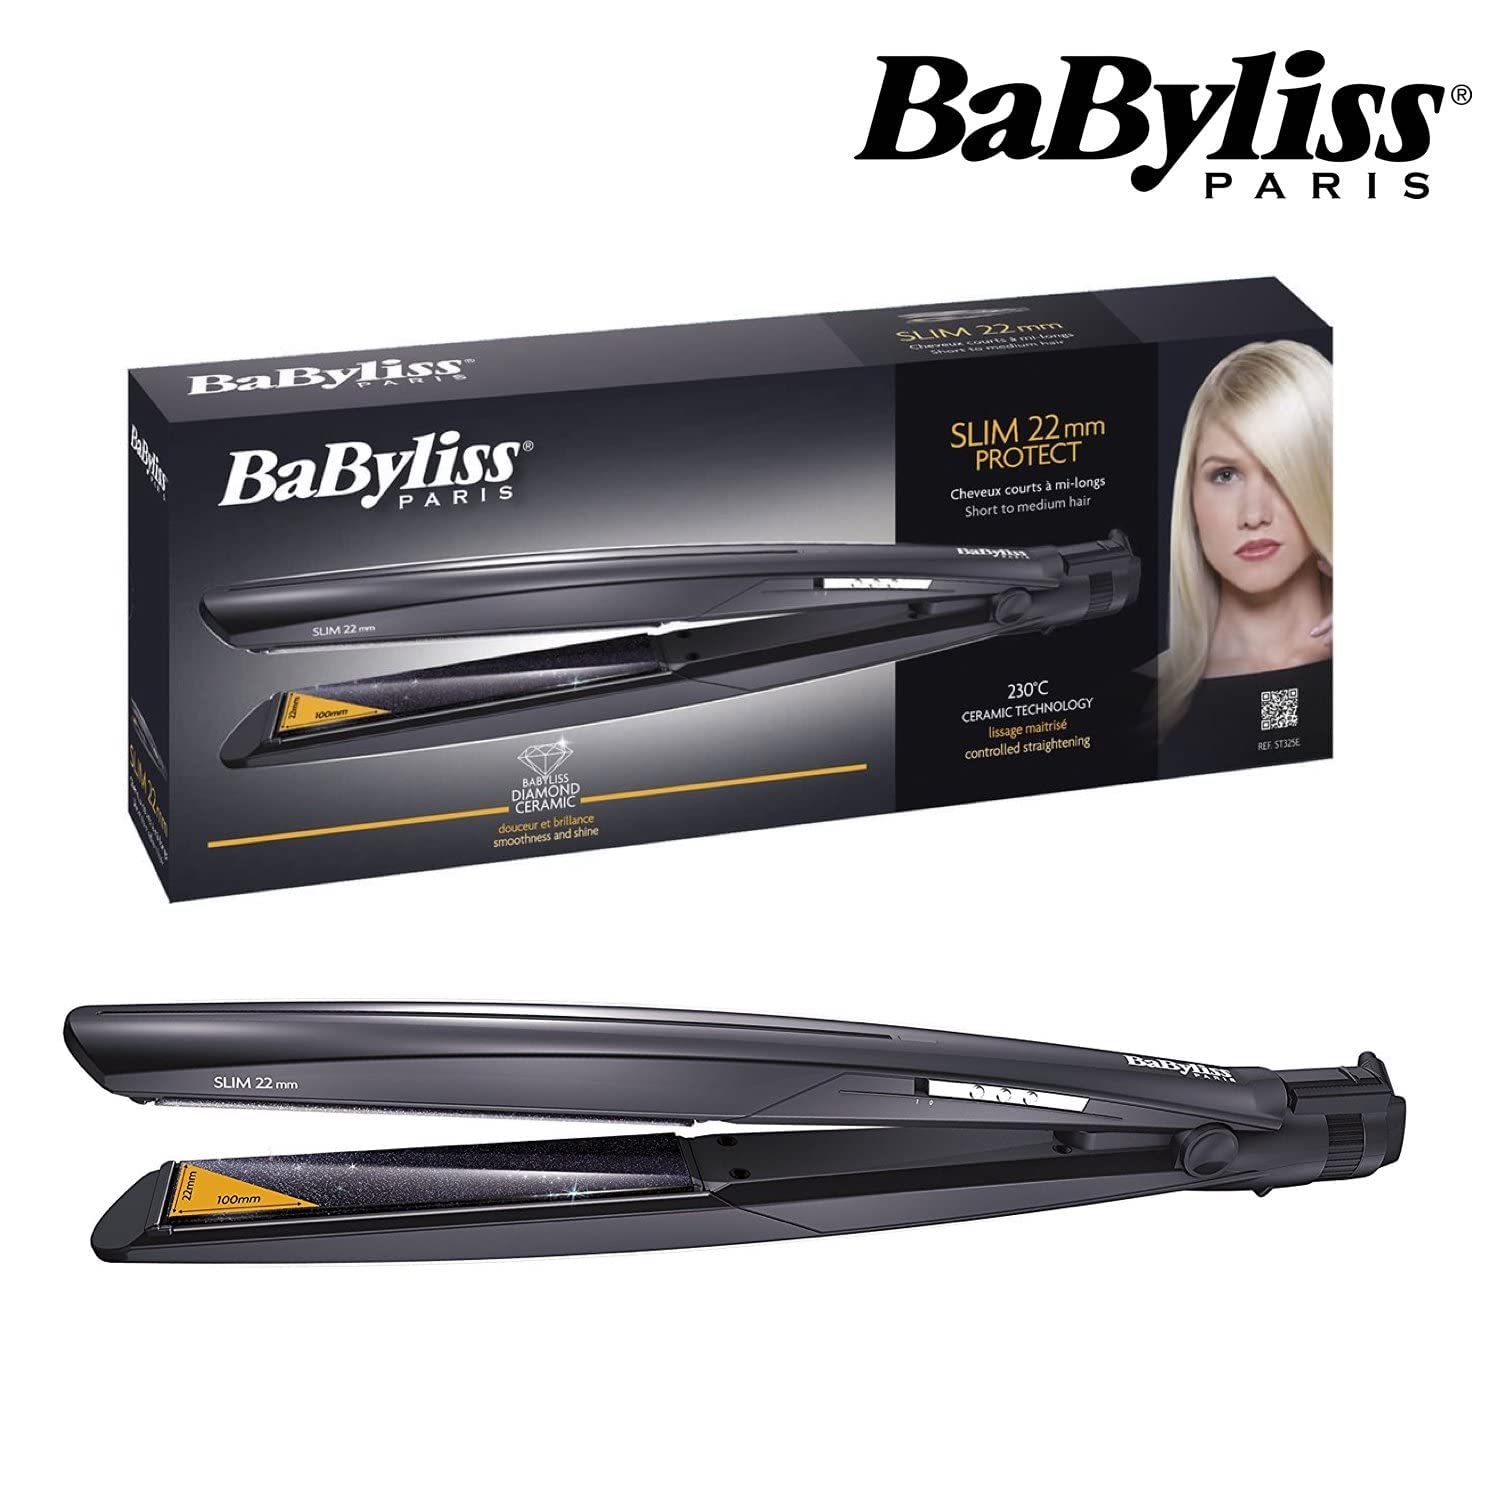 BaByliss Hair Straightener | Protect Straightener With Black Finish For Sleek Styling | Ultra-fast Heat-up Time For Quick Usage | Auto Shut-off Safety Feature For Peace Of Mind | ST325SDE(Black), One Size